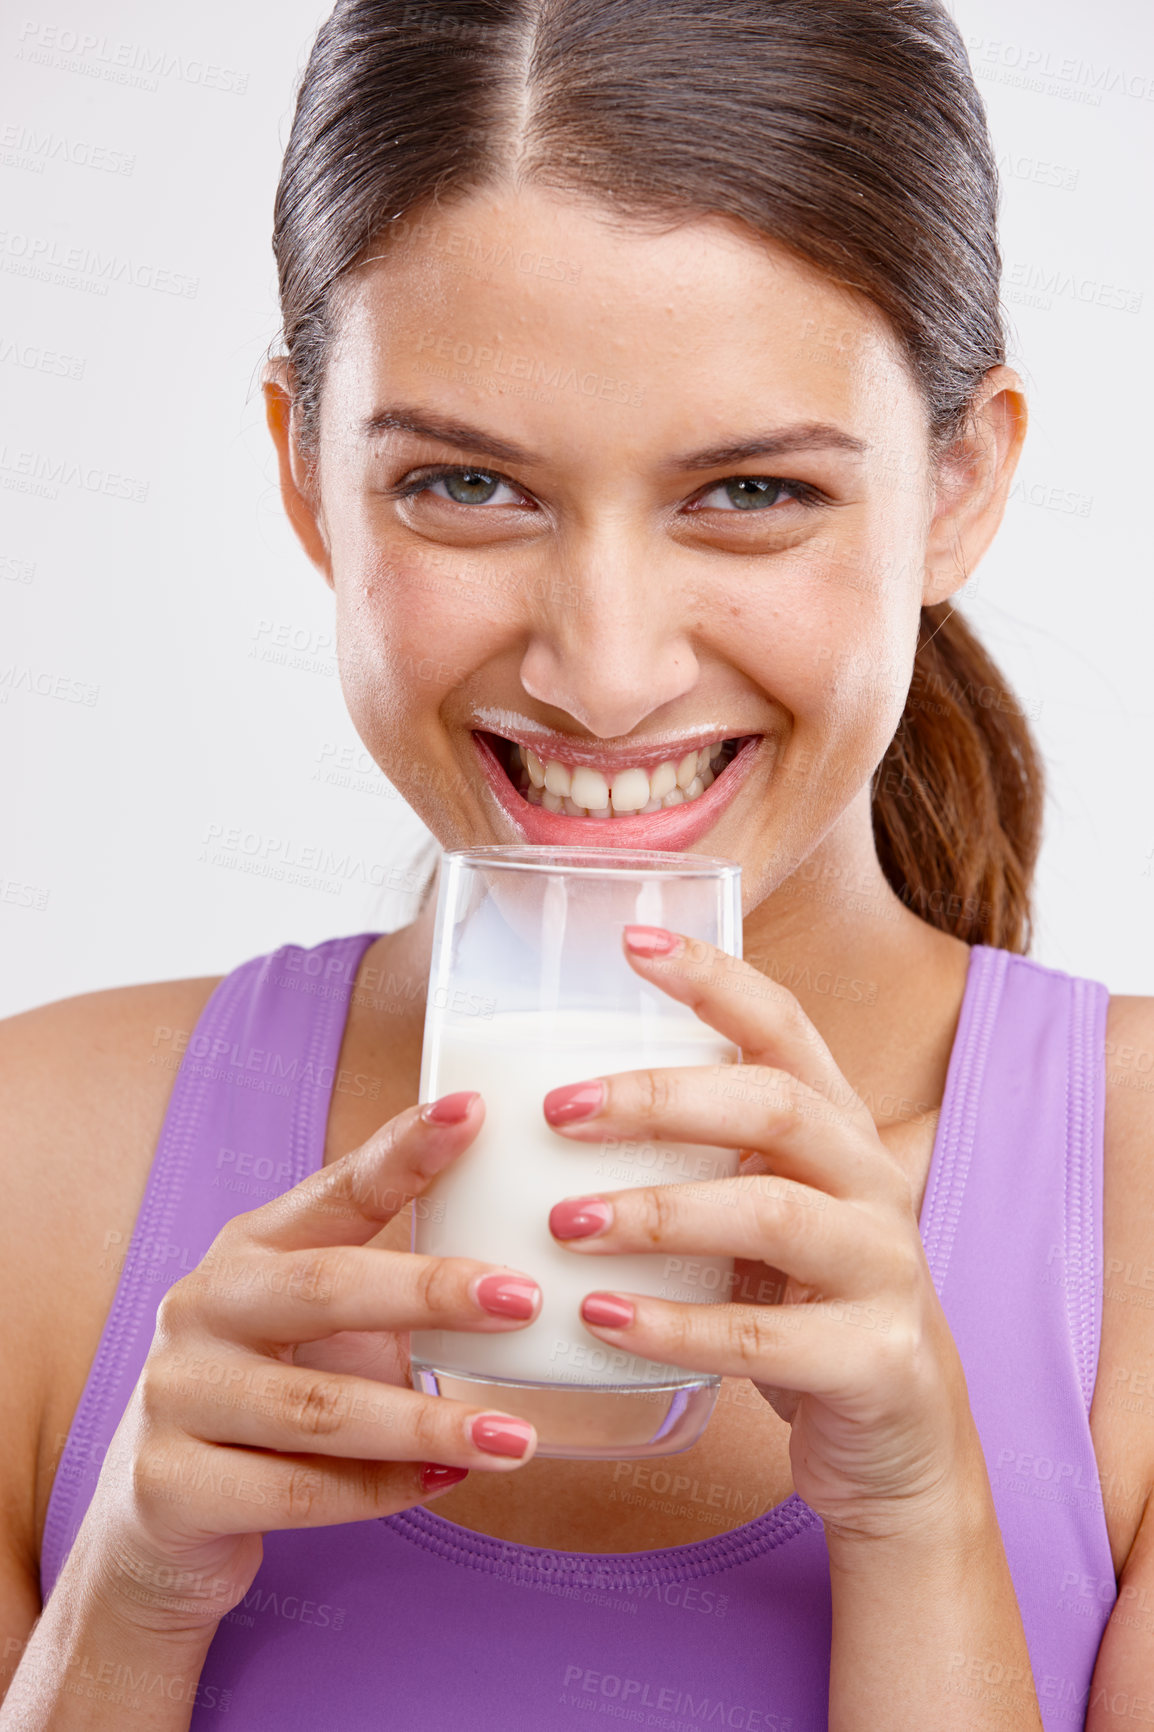 Buy stock photo Portrait of a beautiful woman holding a glass of milk